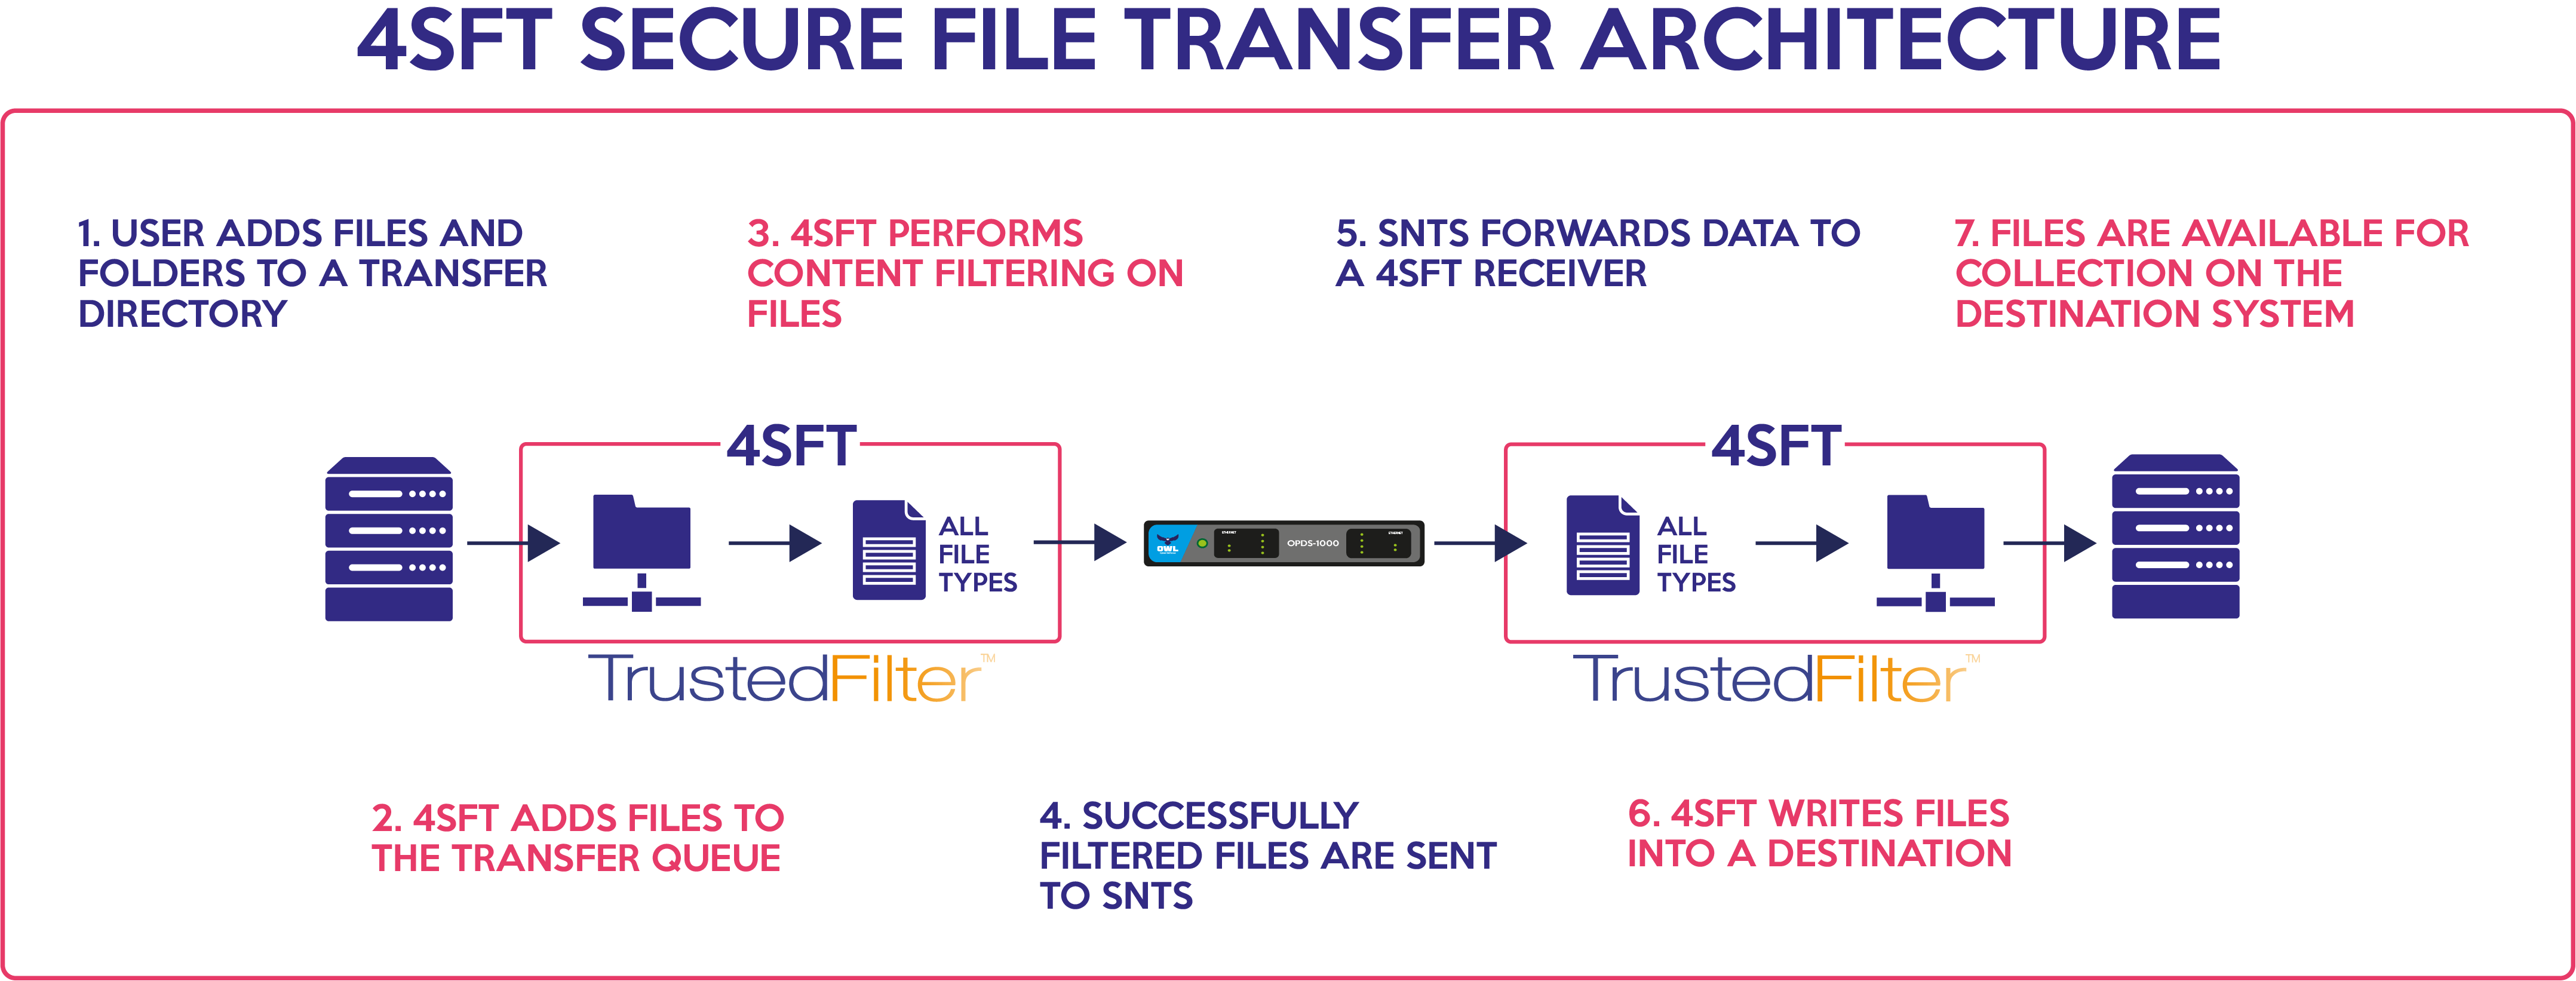 20220531 4SFT SECURE FILE TRANSFER ARCHITECTURE WIREFRAME DIAGRAM@4x